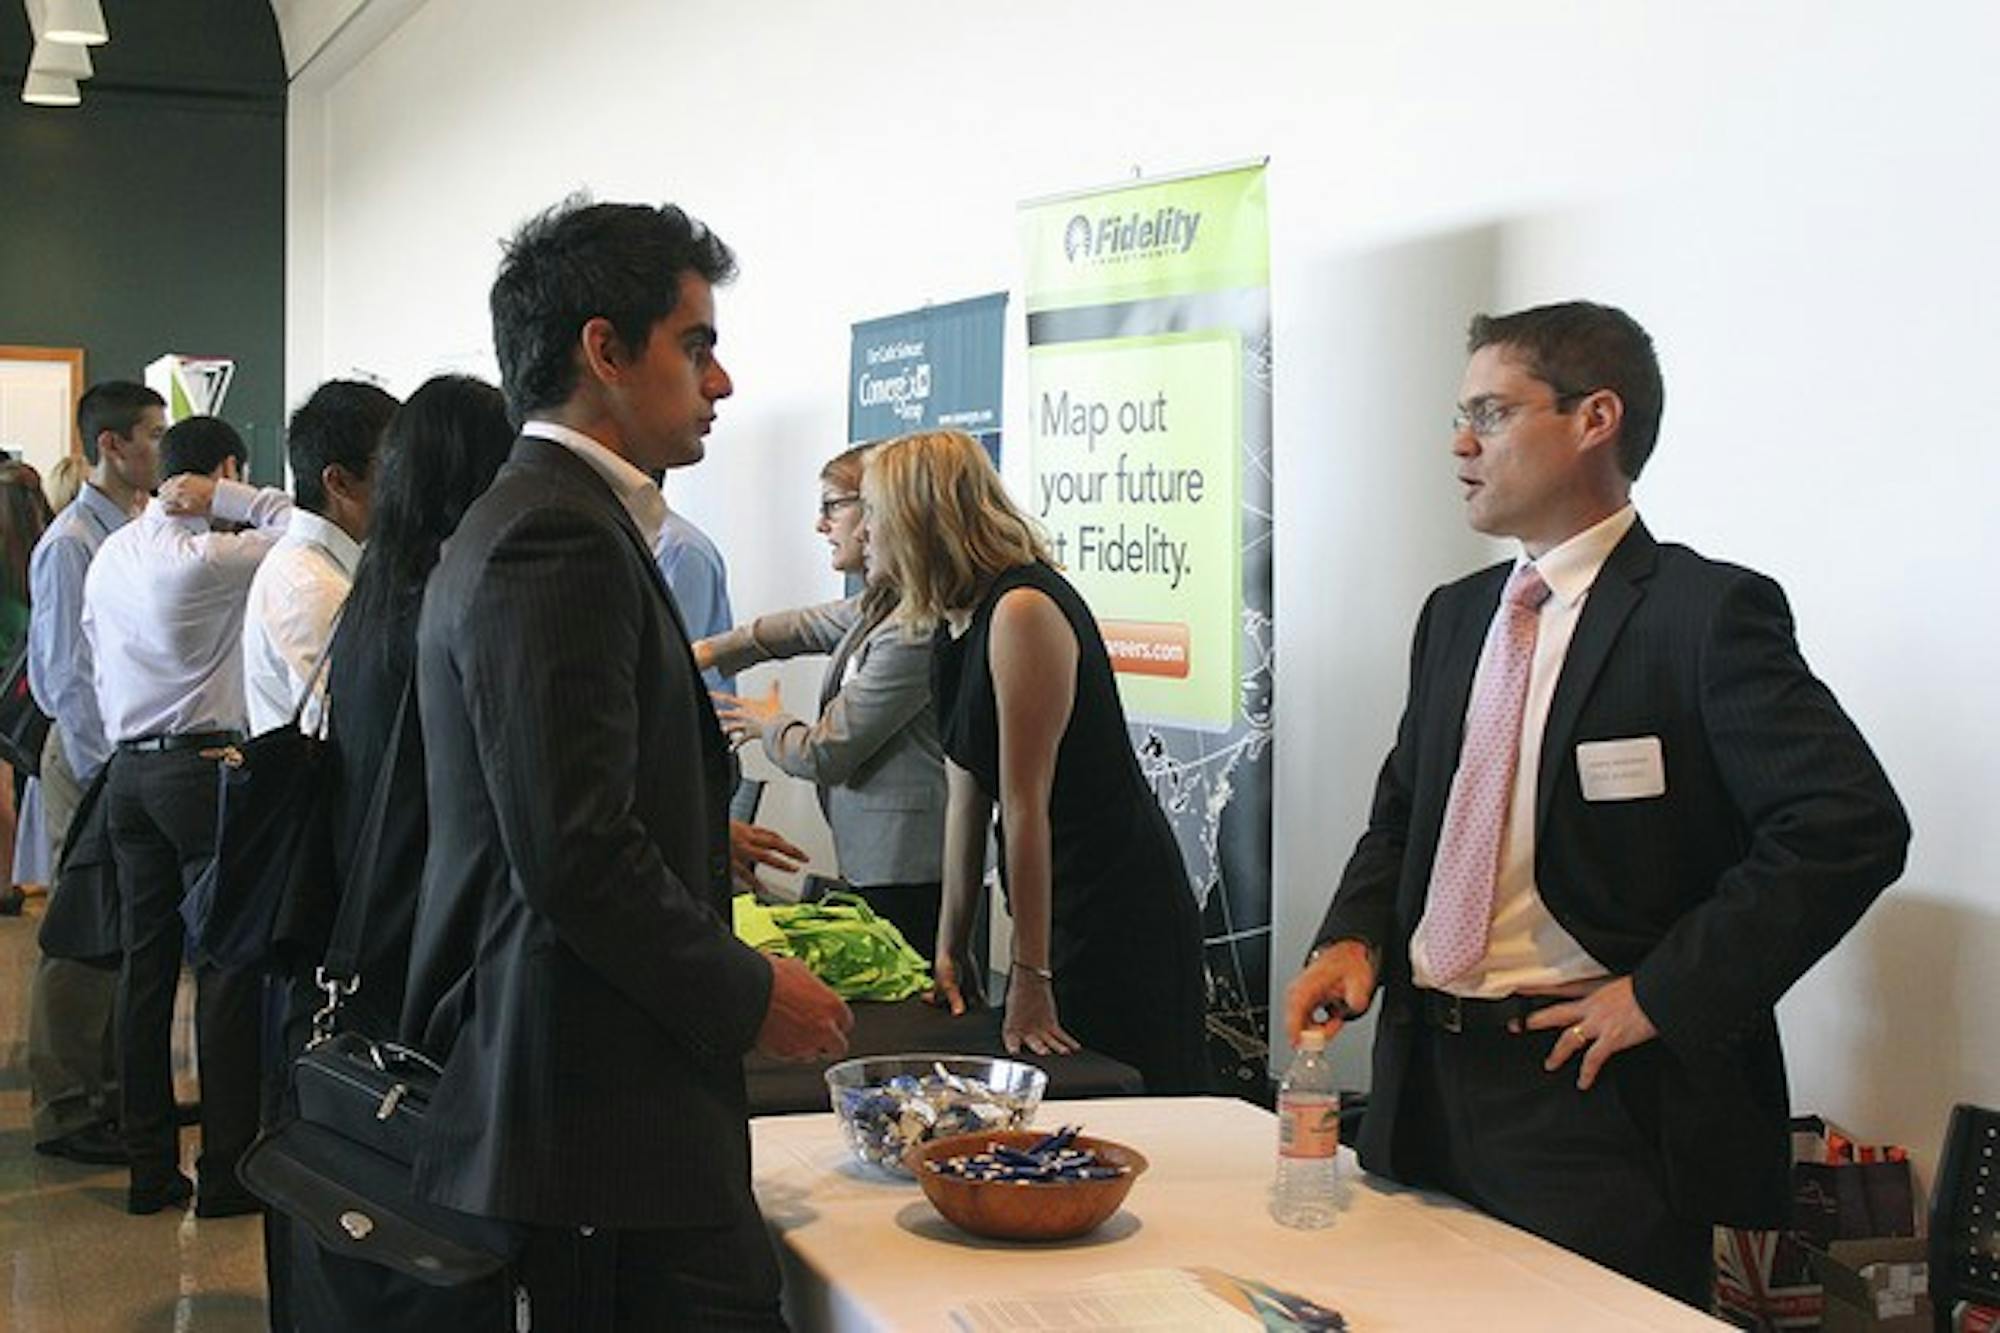 Students turned out in large numbers for Dartmouth's first Law School Fair, held Thursday, and the Employer Connection Fair, held Wednesday and Thursday.